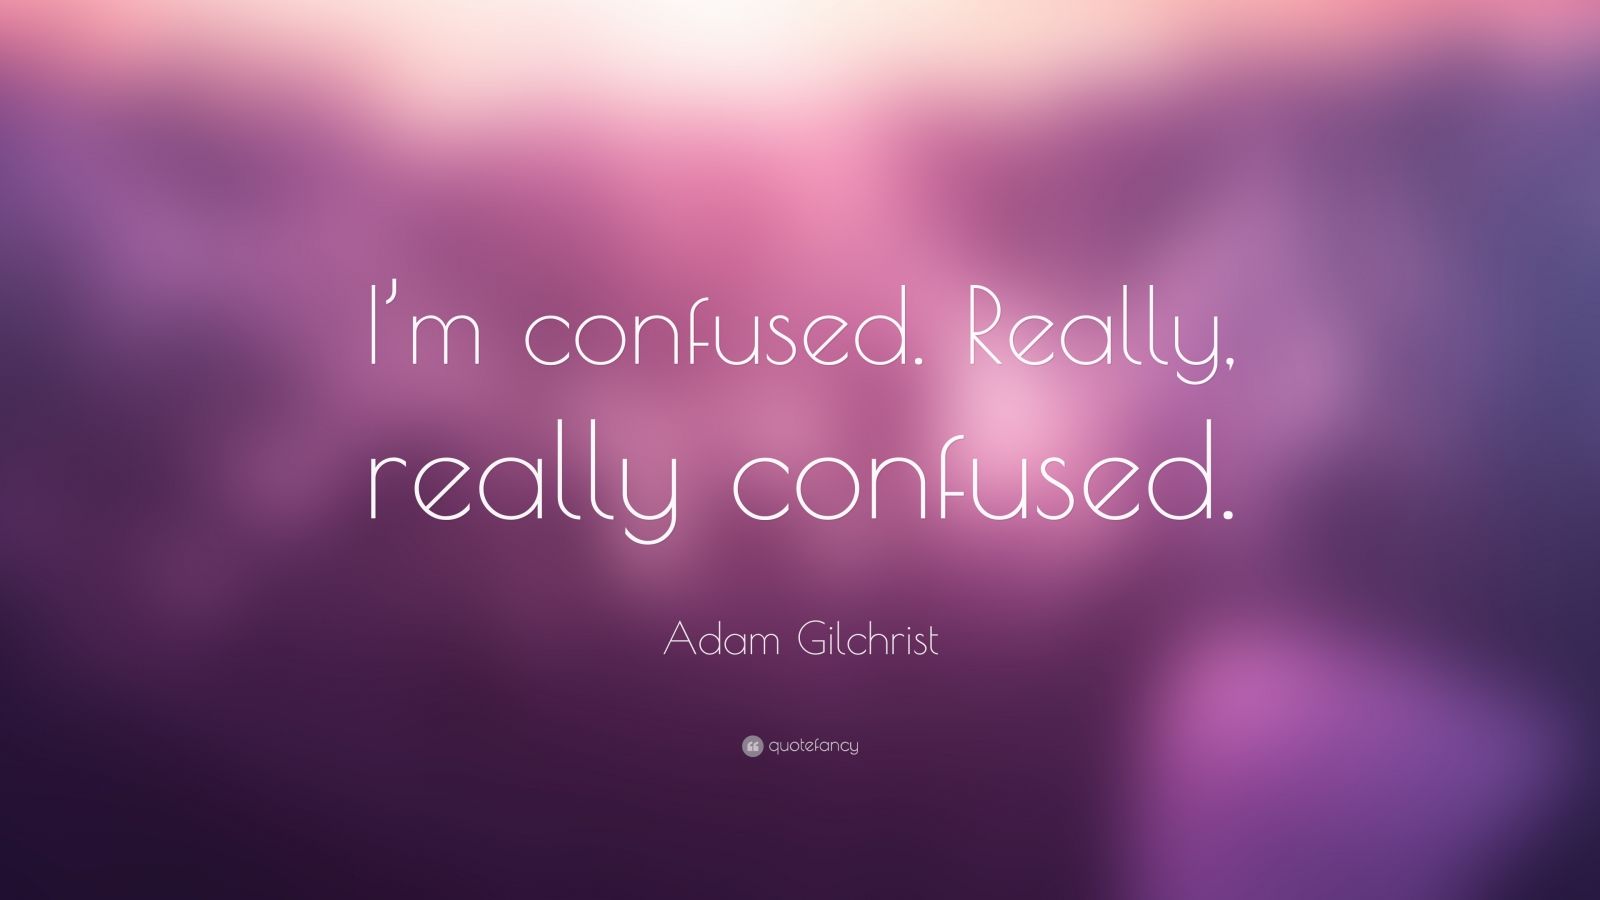 Adam Gilchrist Quotes (10 wallpapers) - Quotefancy
